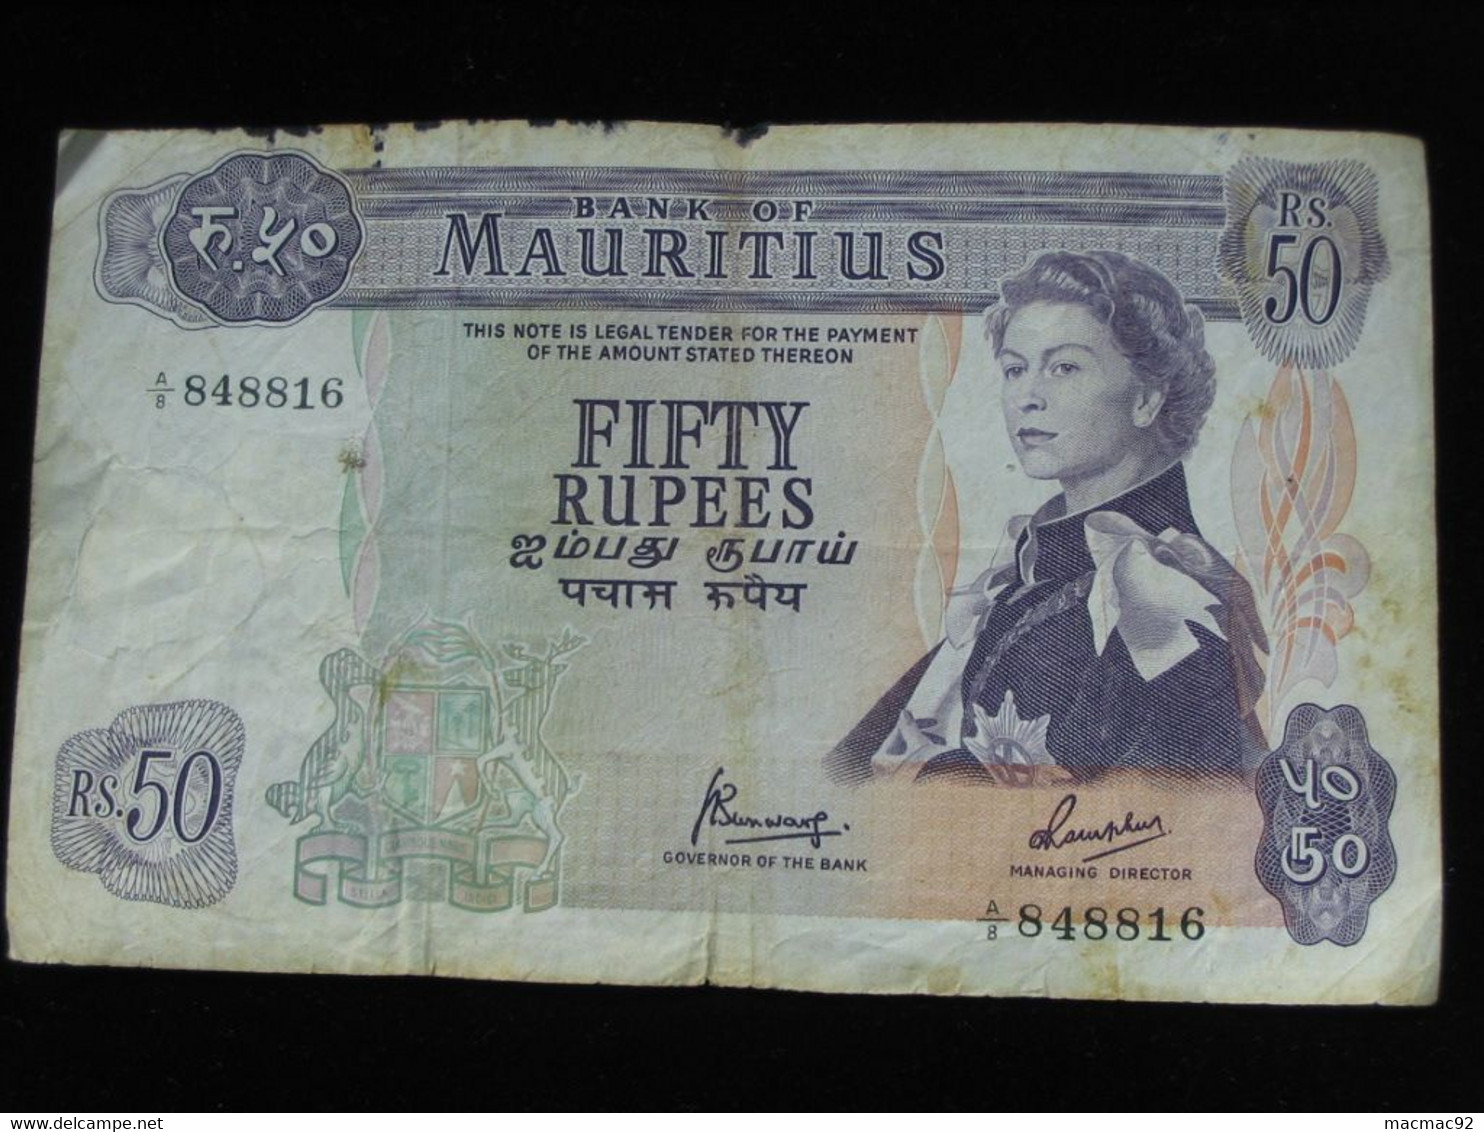 50 FIFTY Rupees 1967 - ILE MAURICE - Bank Of Mauritius  **** EN ACHAT IMMEDIAT ***** - Mauricio